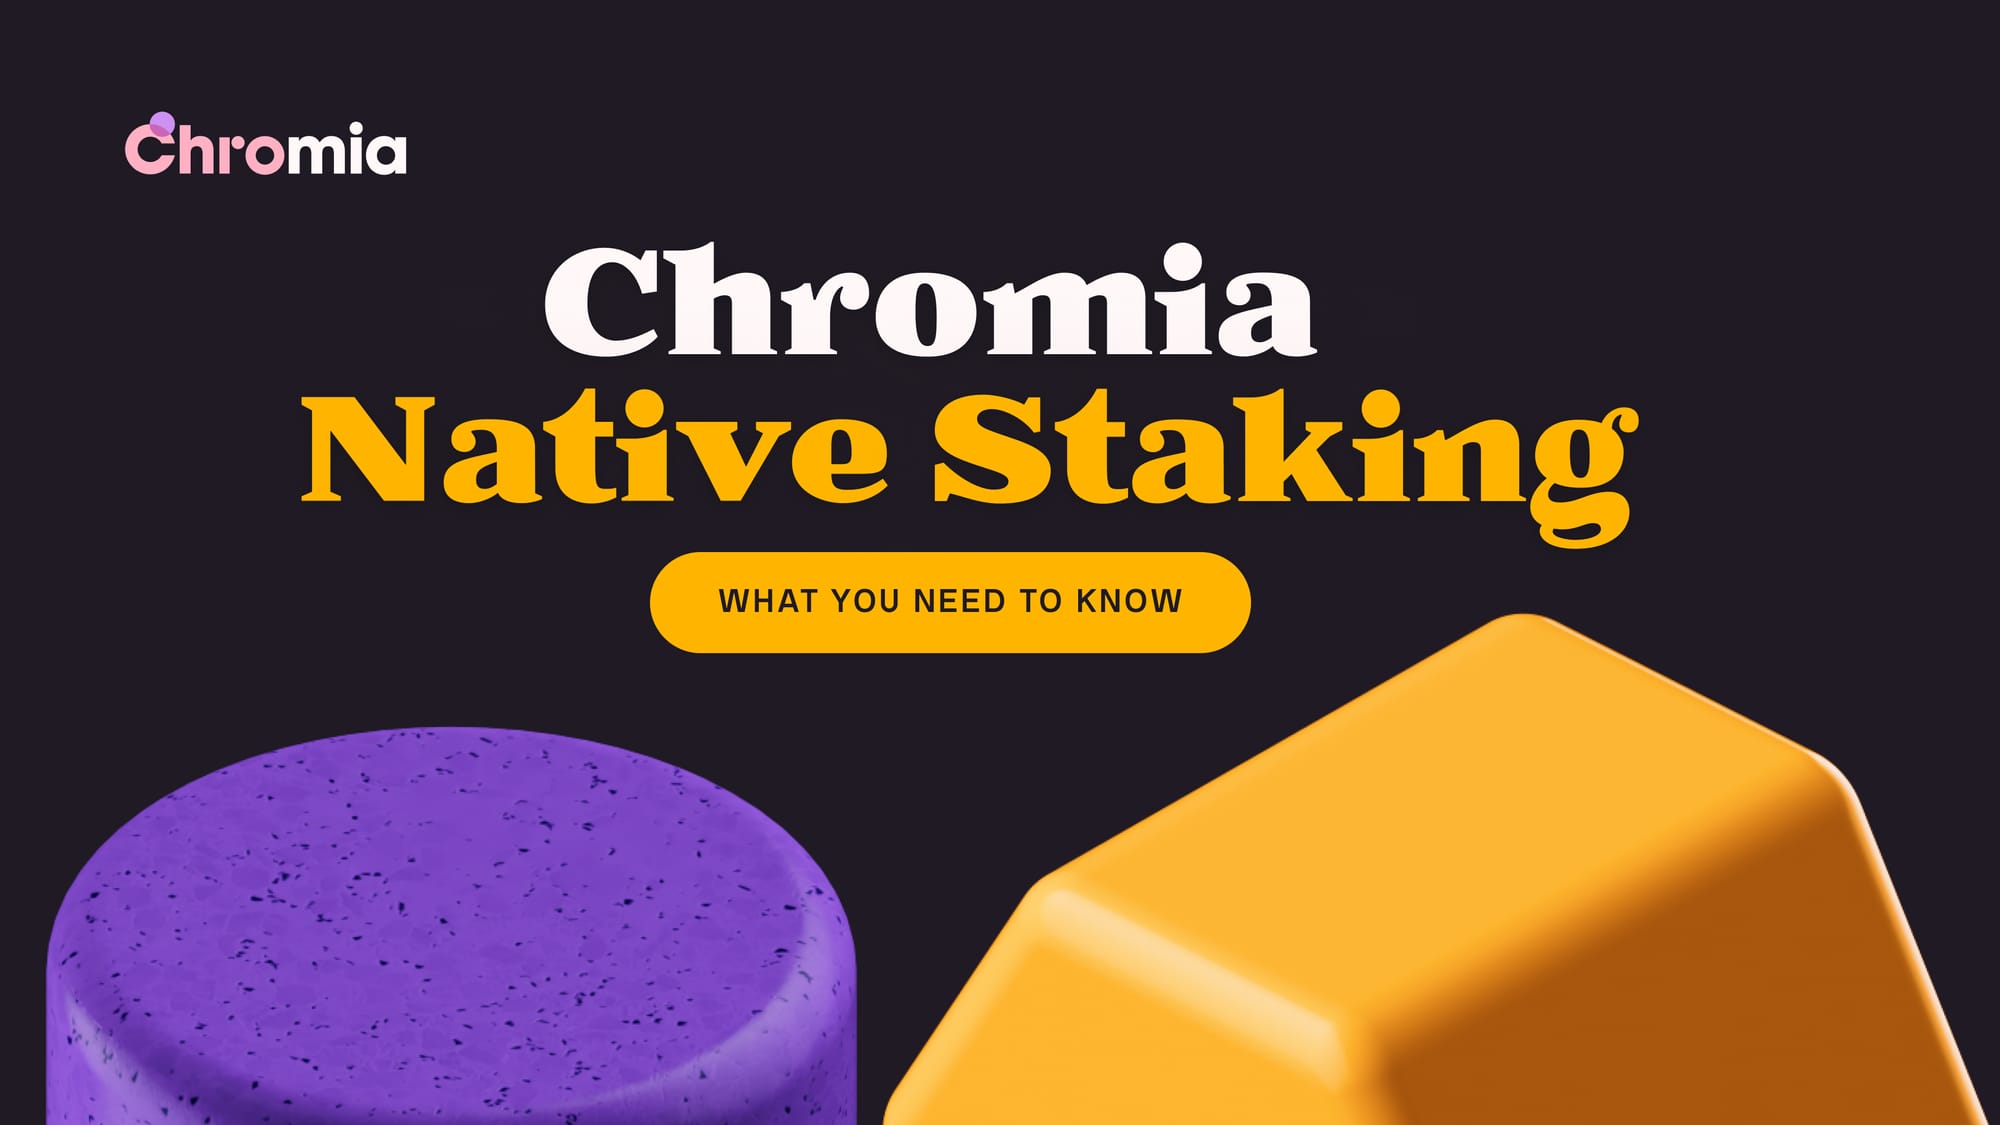 Chromia Native Staking: What You Need to Know